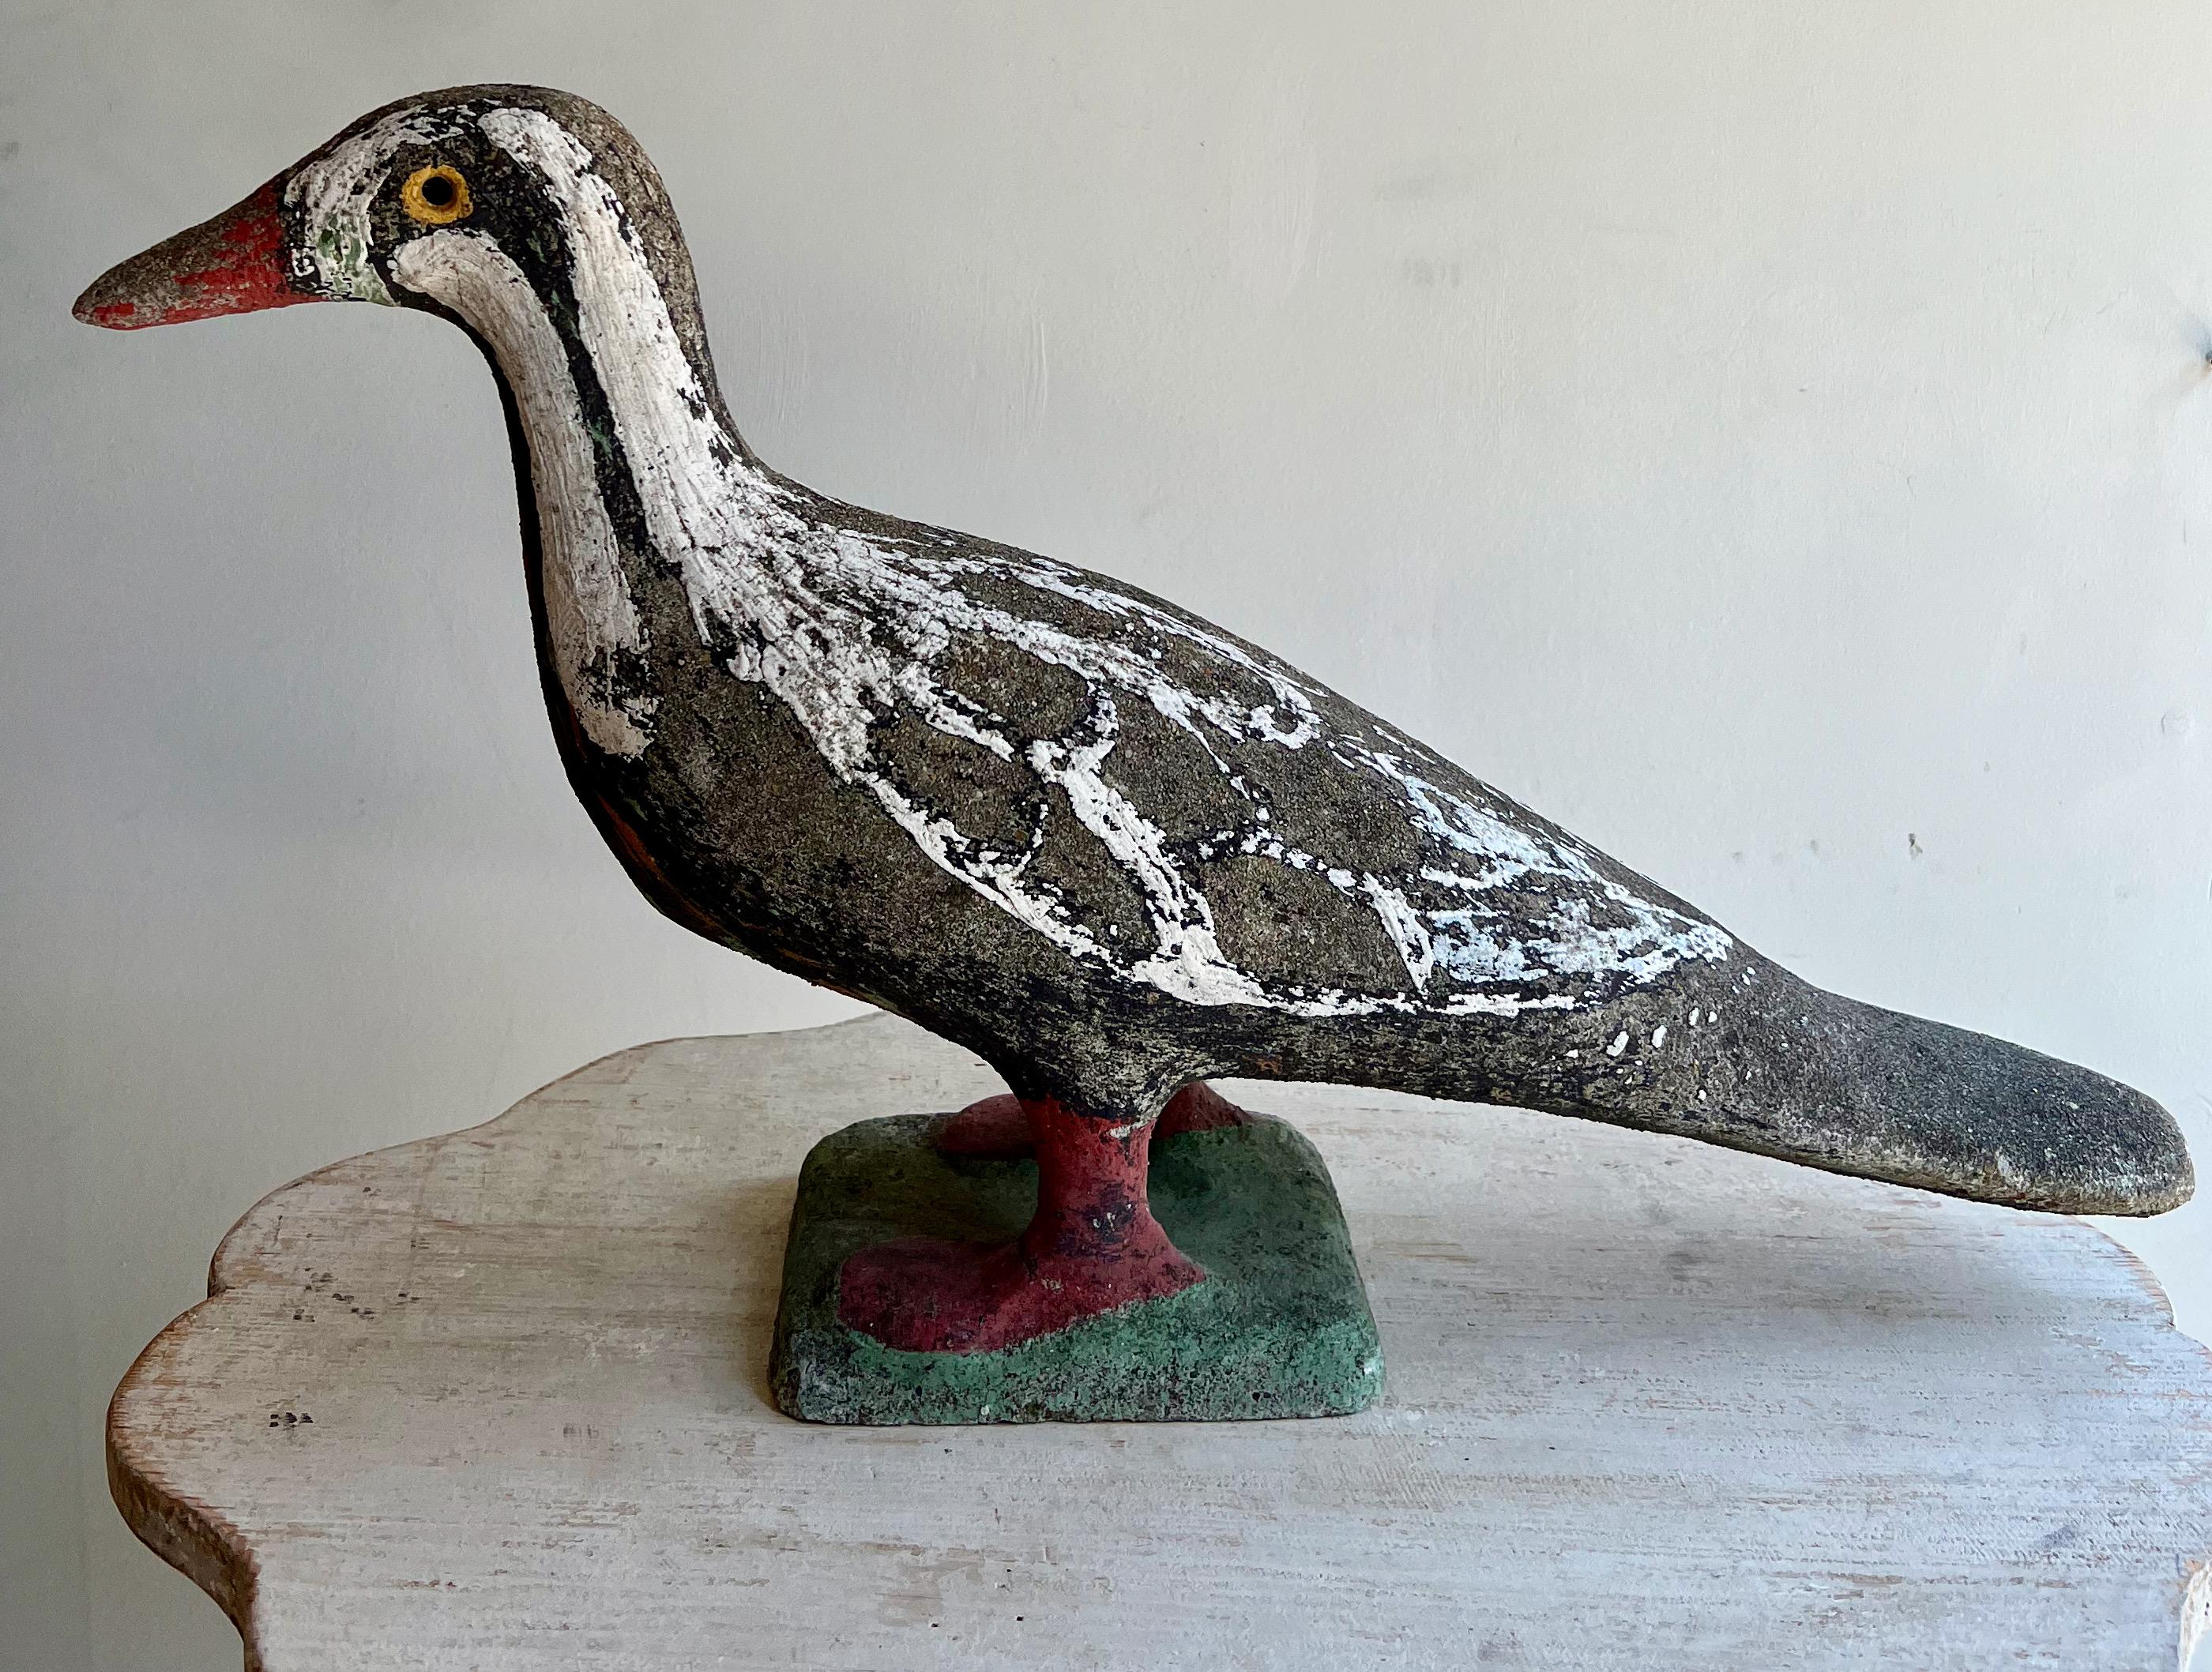 A large rare garden sculpture bird by artist Émile Taugourdeau, self made sculptor who made most beautiful of human characters and animal.
This garden bird sculpture is perfectly preserved and so charming colored with glass eyes.
Base: 6.50